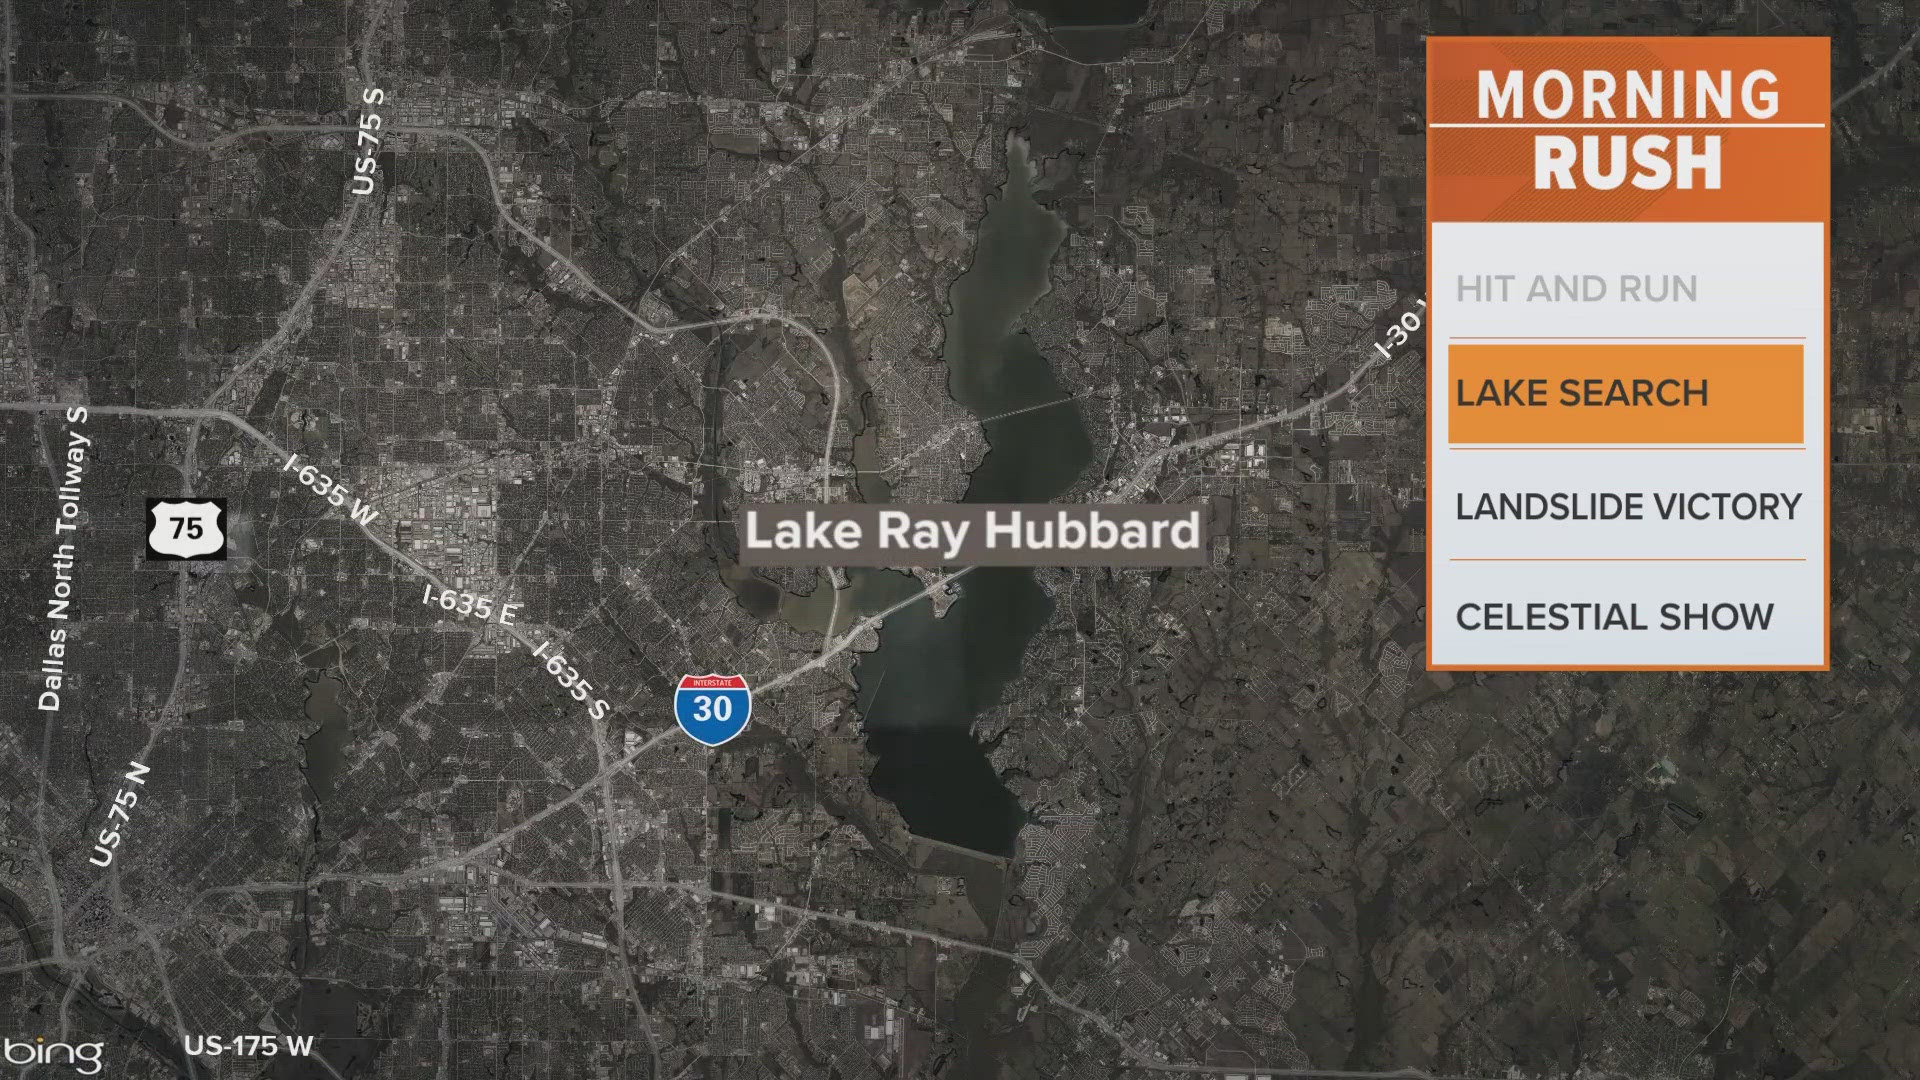 Dallas Fire-Rescue will pick up their search on Friday for two people who jumped into Lake Ray Hubbard and did not come back up.